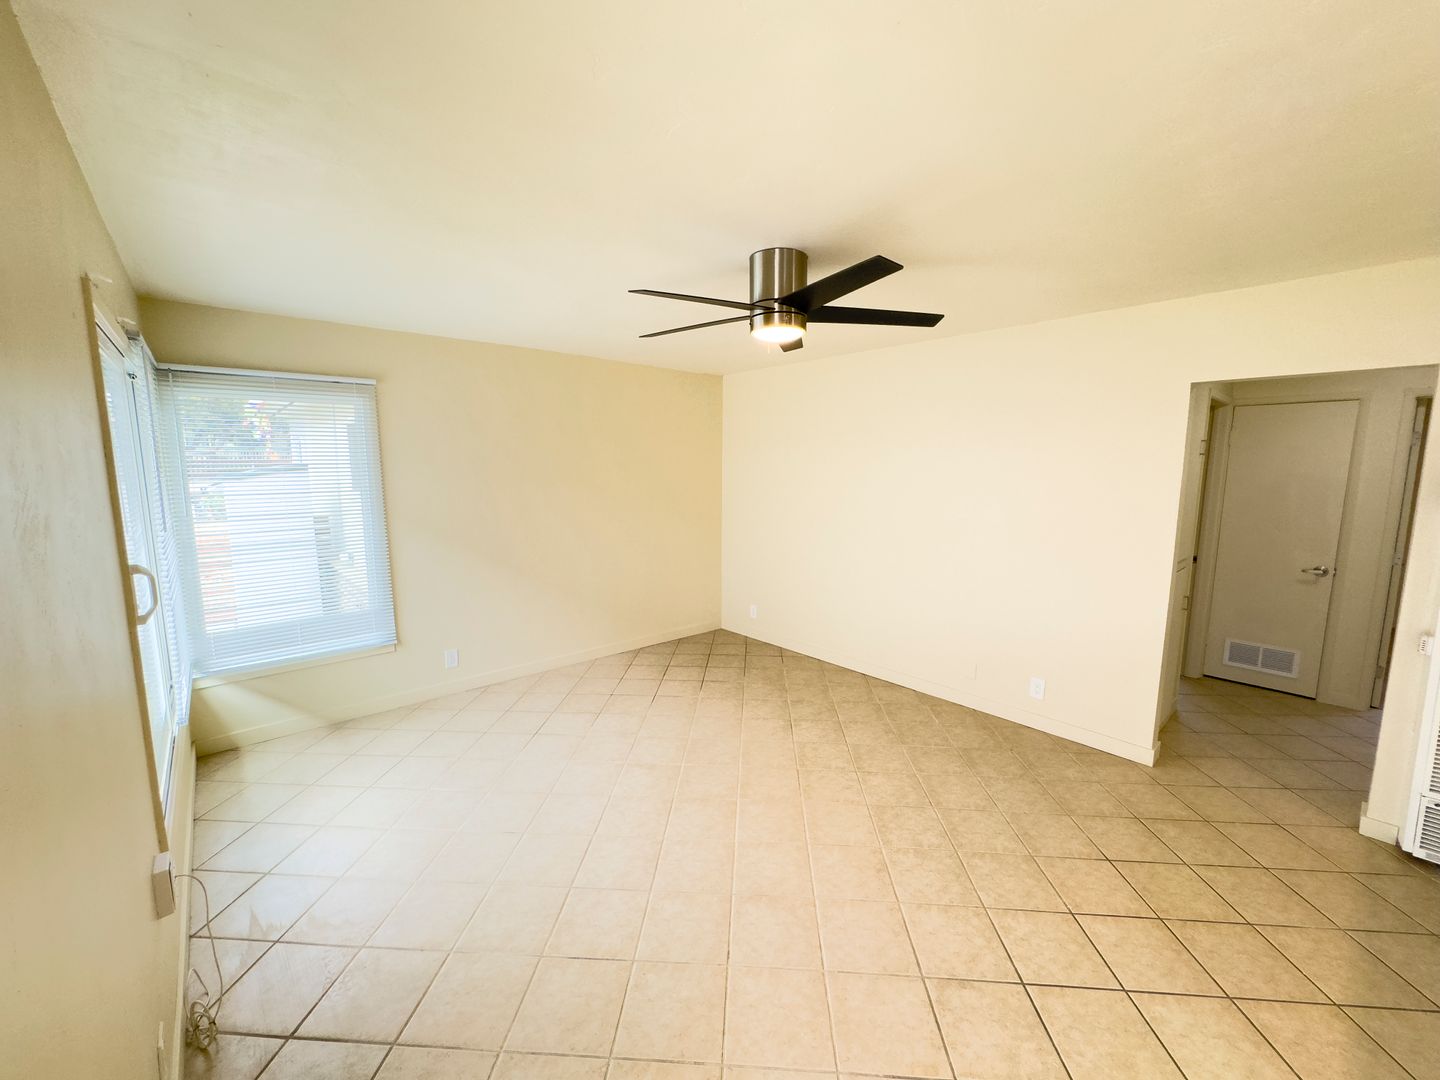 Updated 2 bedroom 1 bath 7 Blocks from the Beach